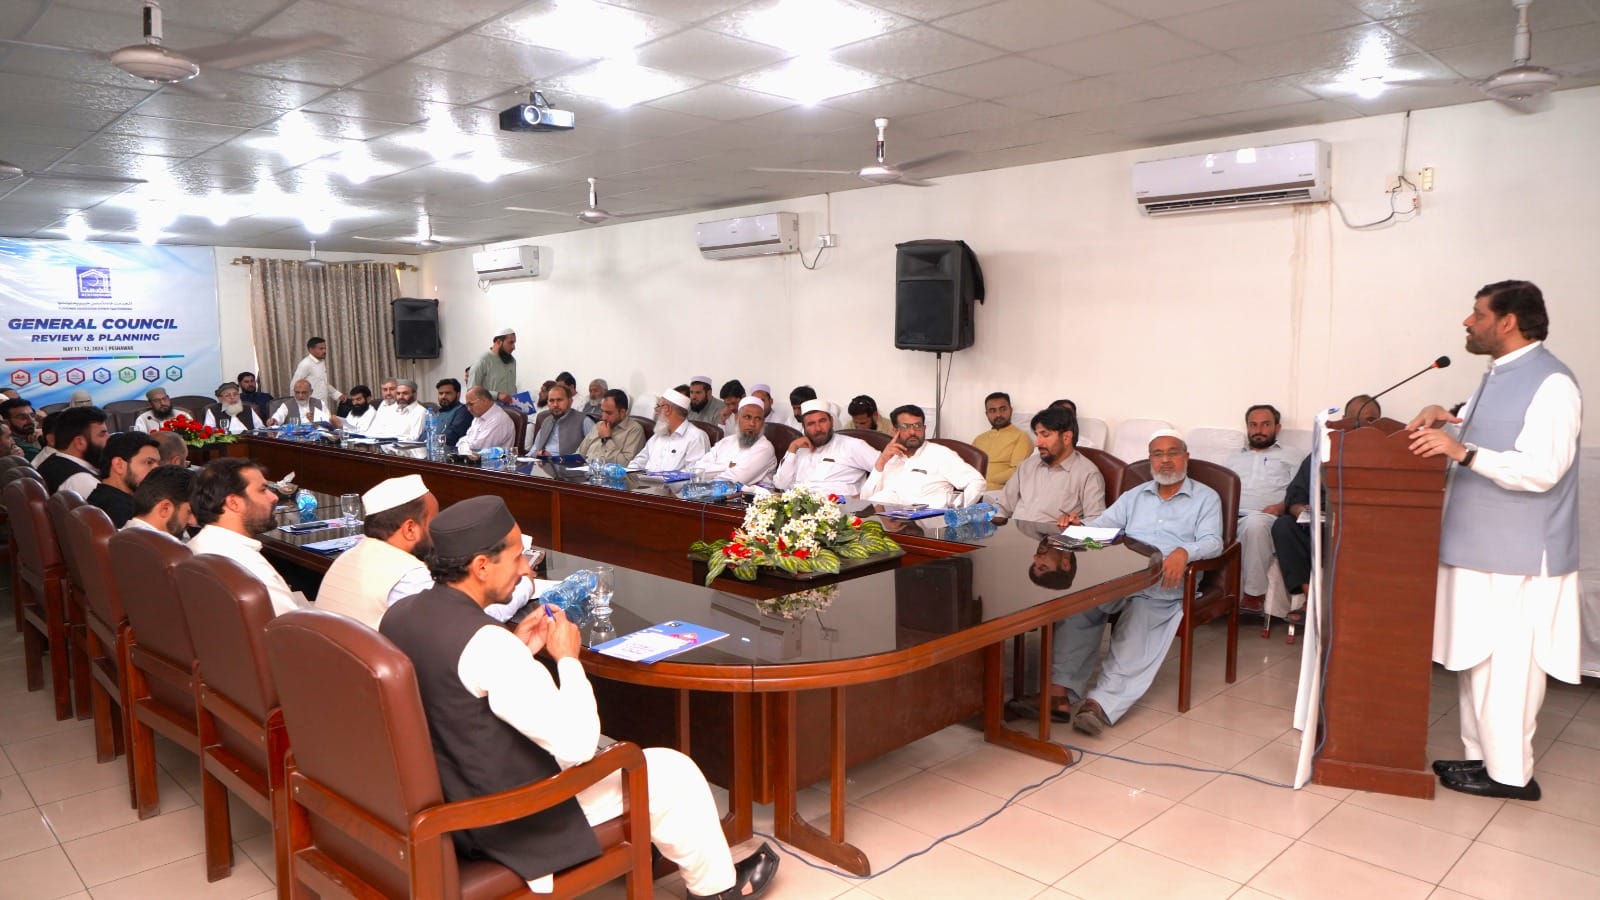 Alkhidmat KP GC meeting held: Committed to serve humanity